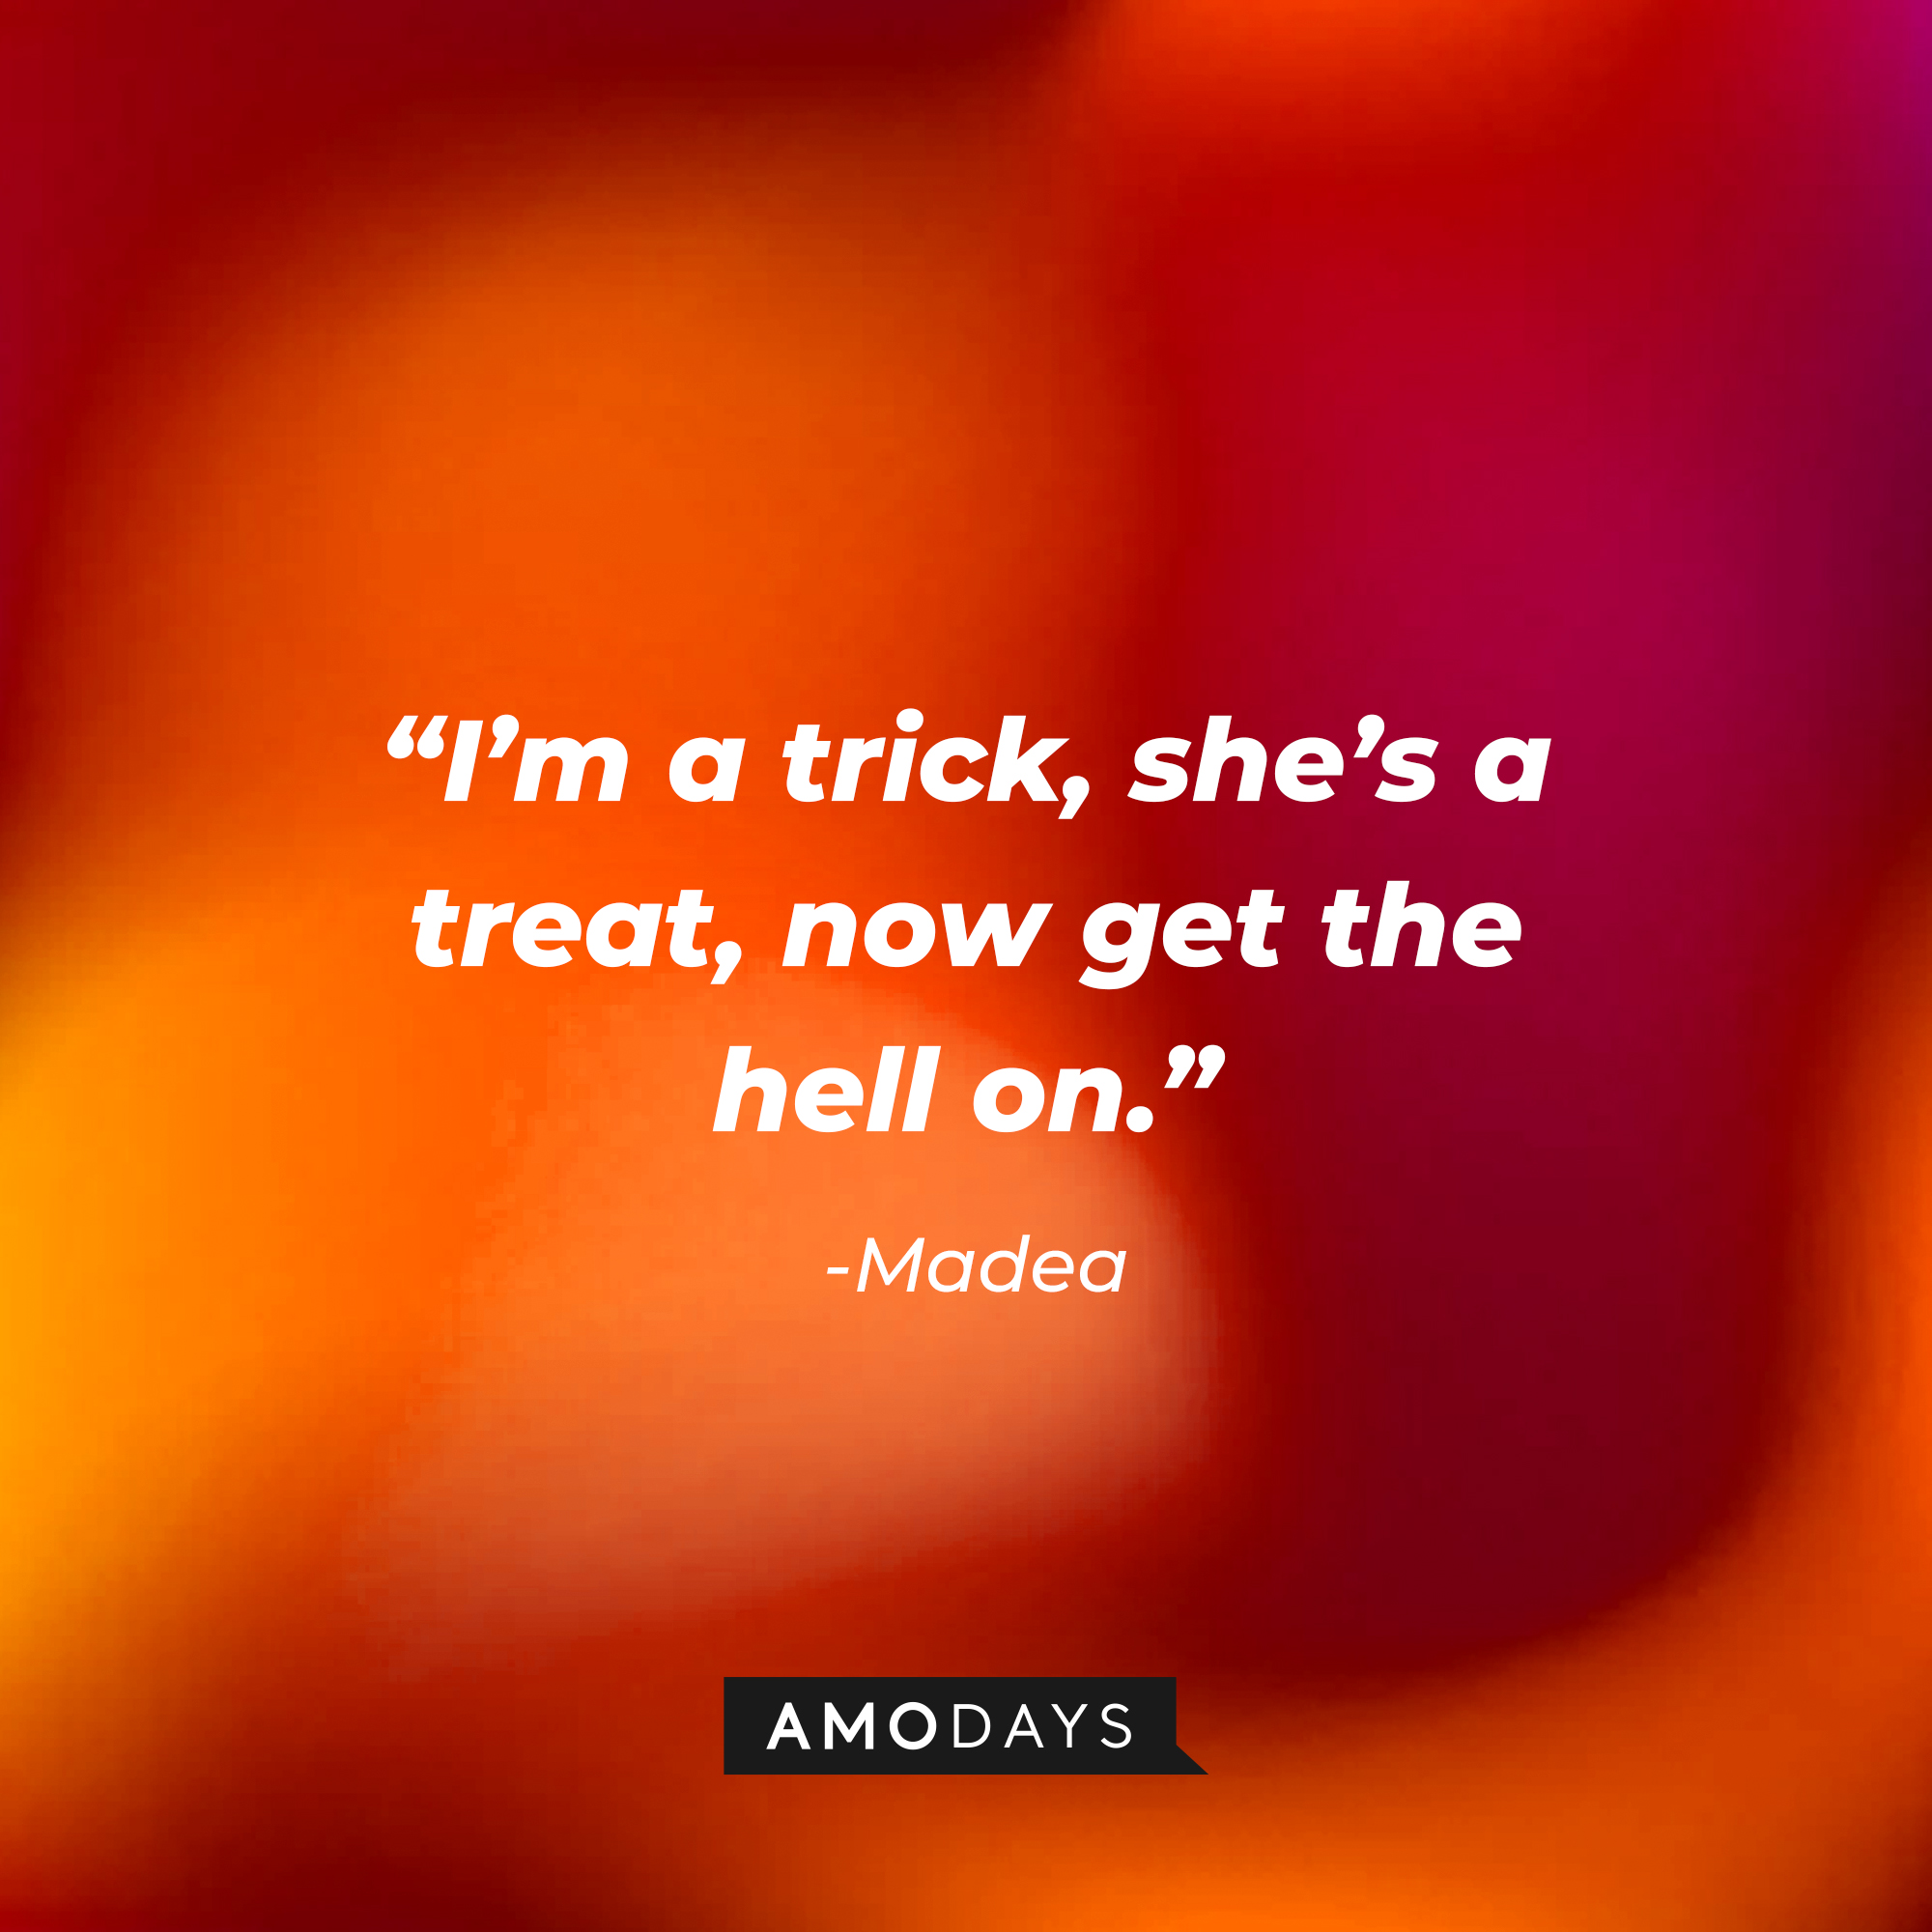 Madea’s quote: “I’m a trick, she’s a treat, now get the hell on.” | Source: AmoDays